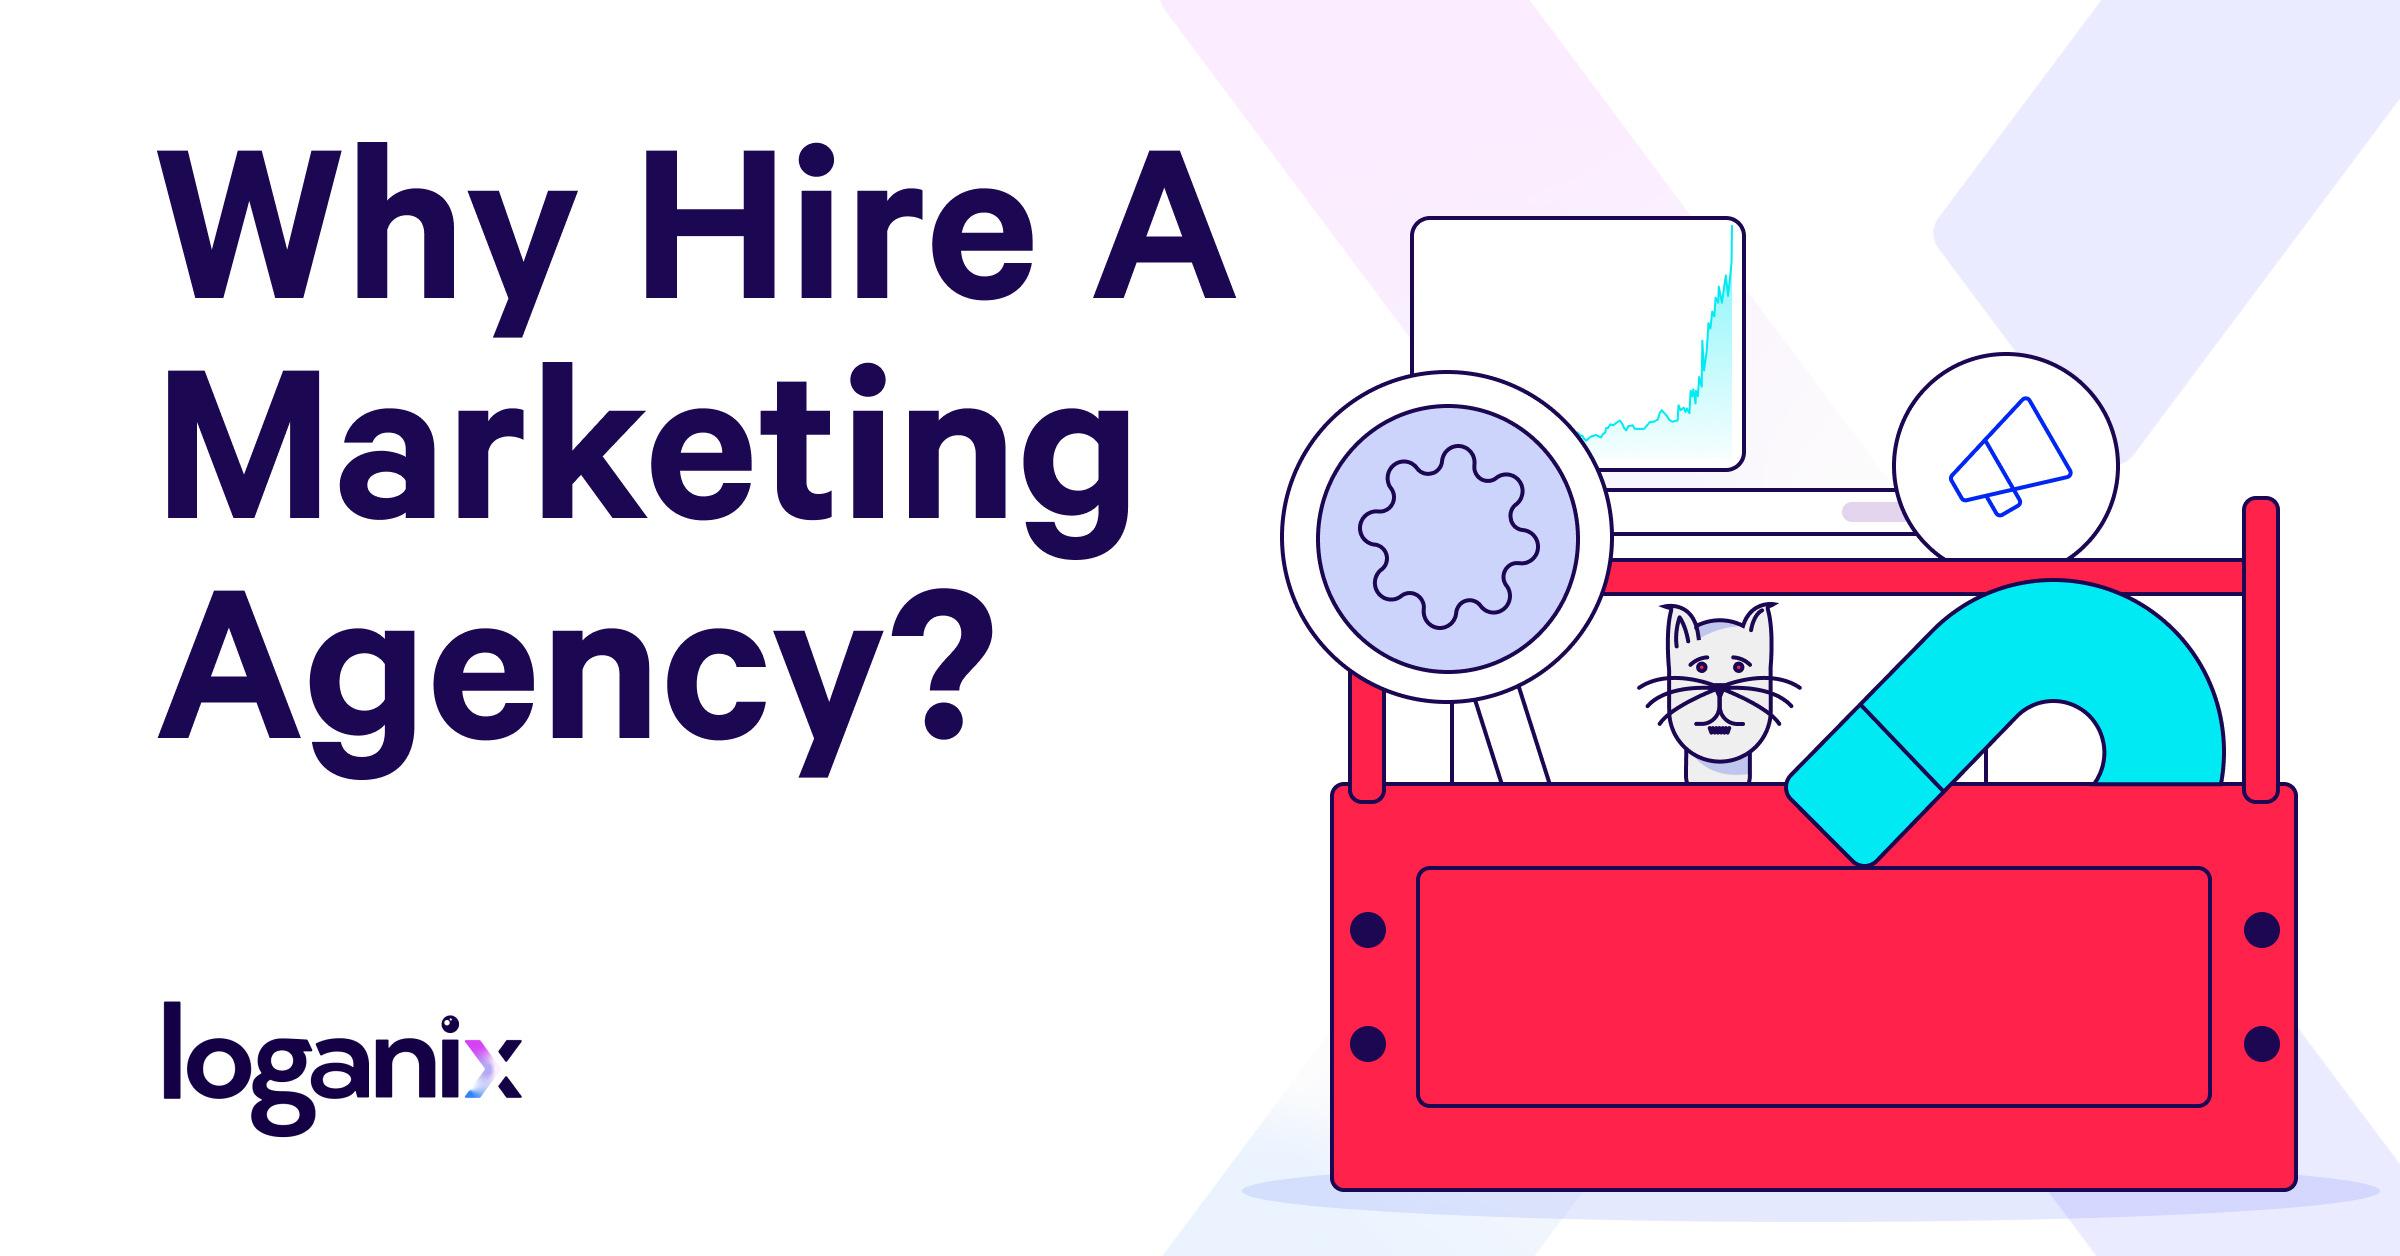 Why Hire A Marketing Agency?